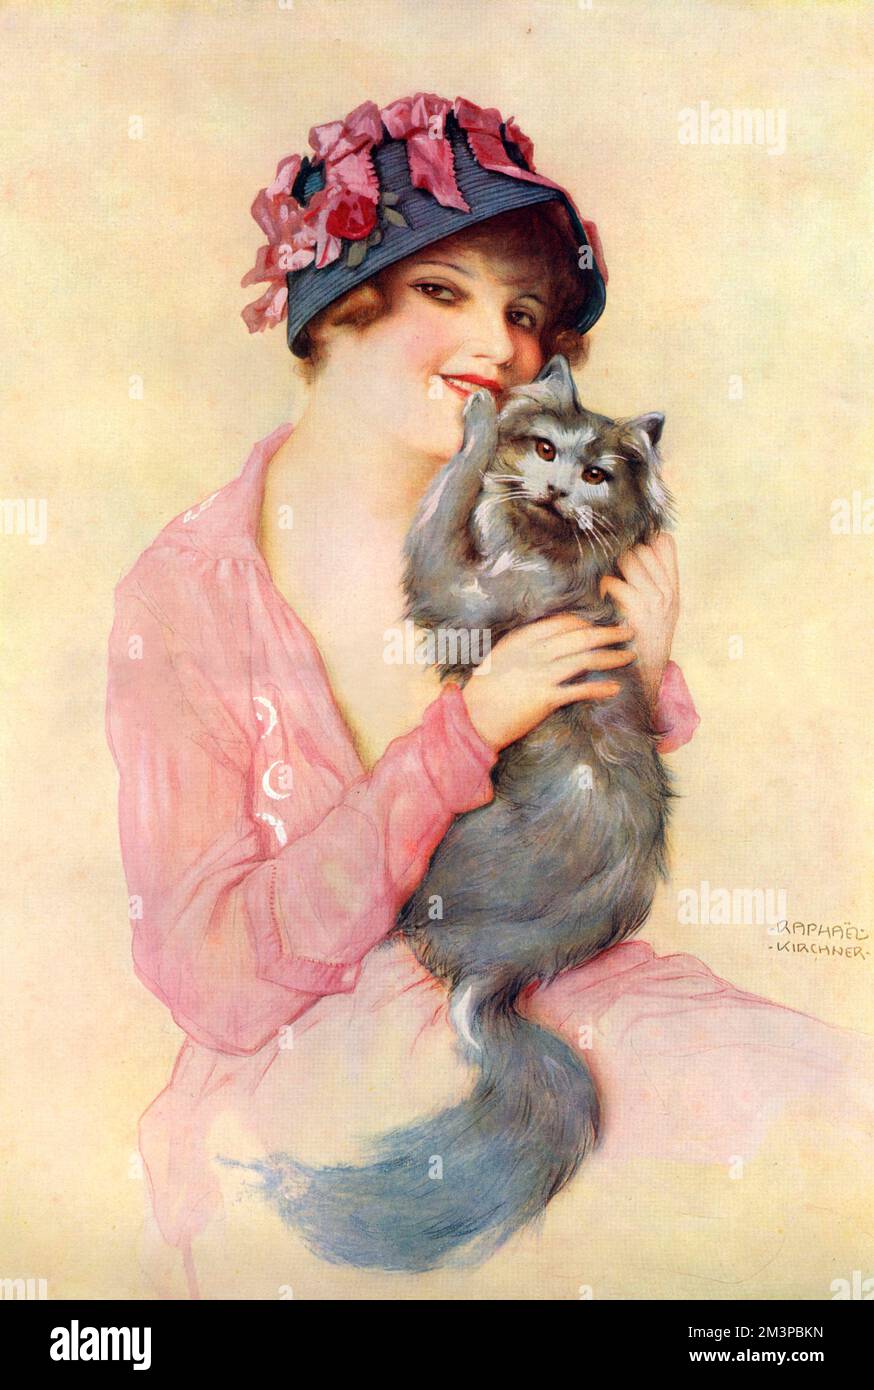 A pretty young woman in pink blouse hugs a long-haired grey cat.  Illustration by Raphael Kircher reproduced in The Illustrated London News Christmas Number.  Kirchner's pin-ups in The Sketch were incredibly popular during the Great War.  This is a rather more sedate picture, more suitable for a family magazine.      Date: 1916 Stock Photo